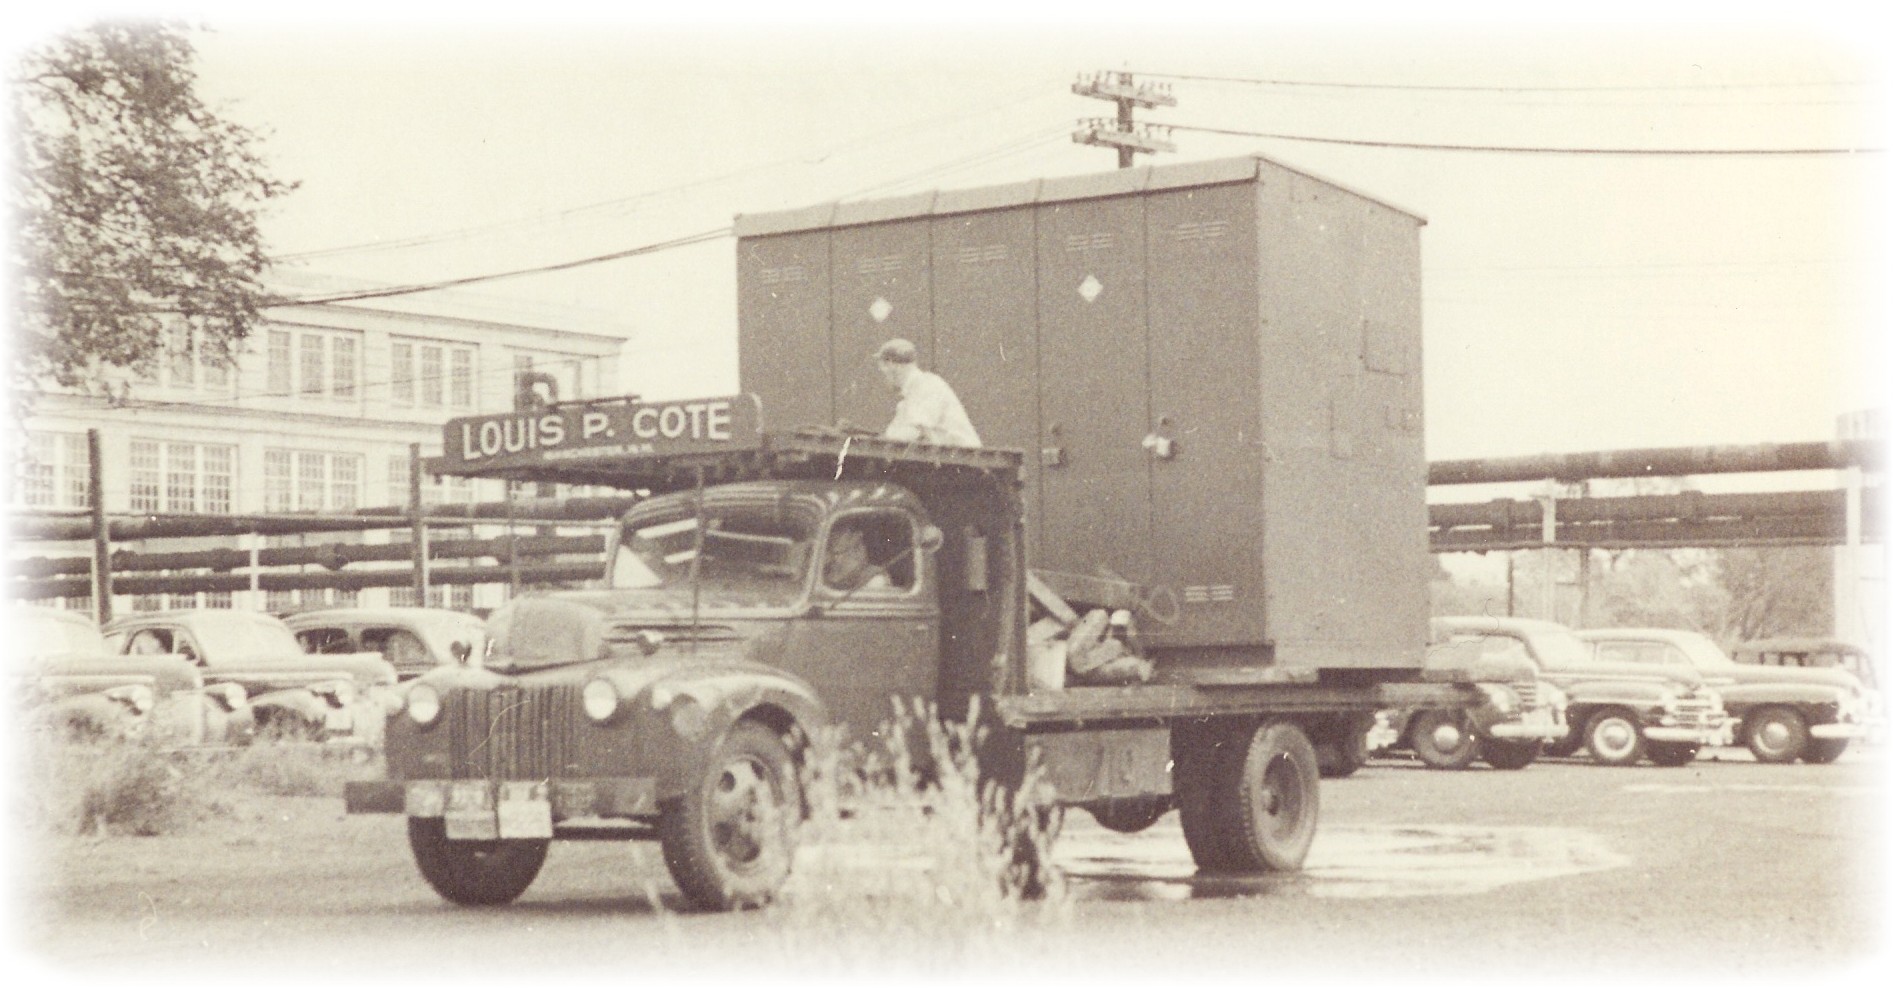 Louis P. Cote, Inc. transporting an over width switchgear assembly in the 1950s